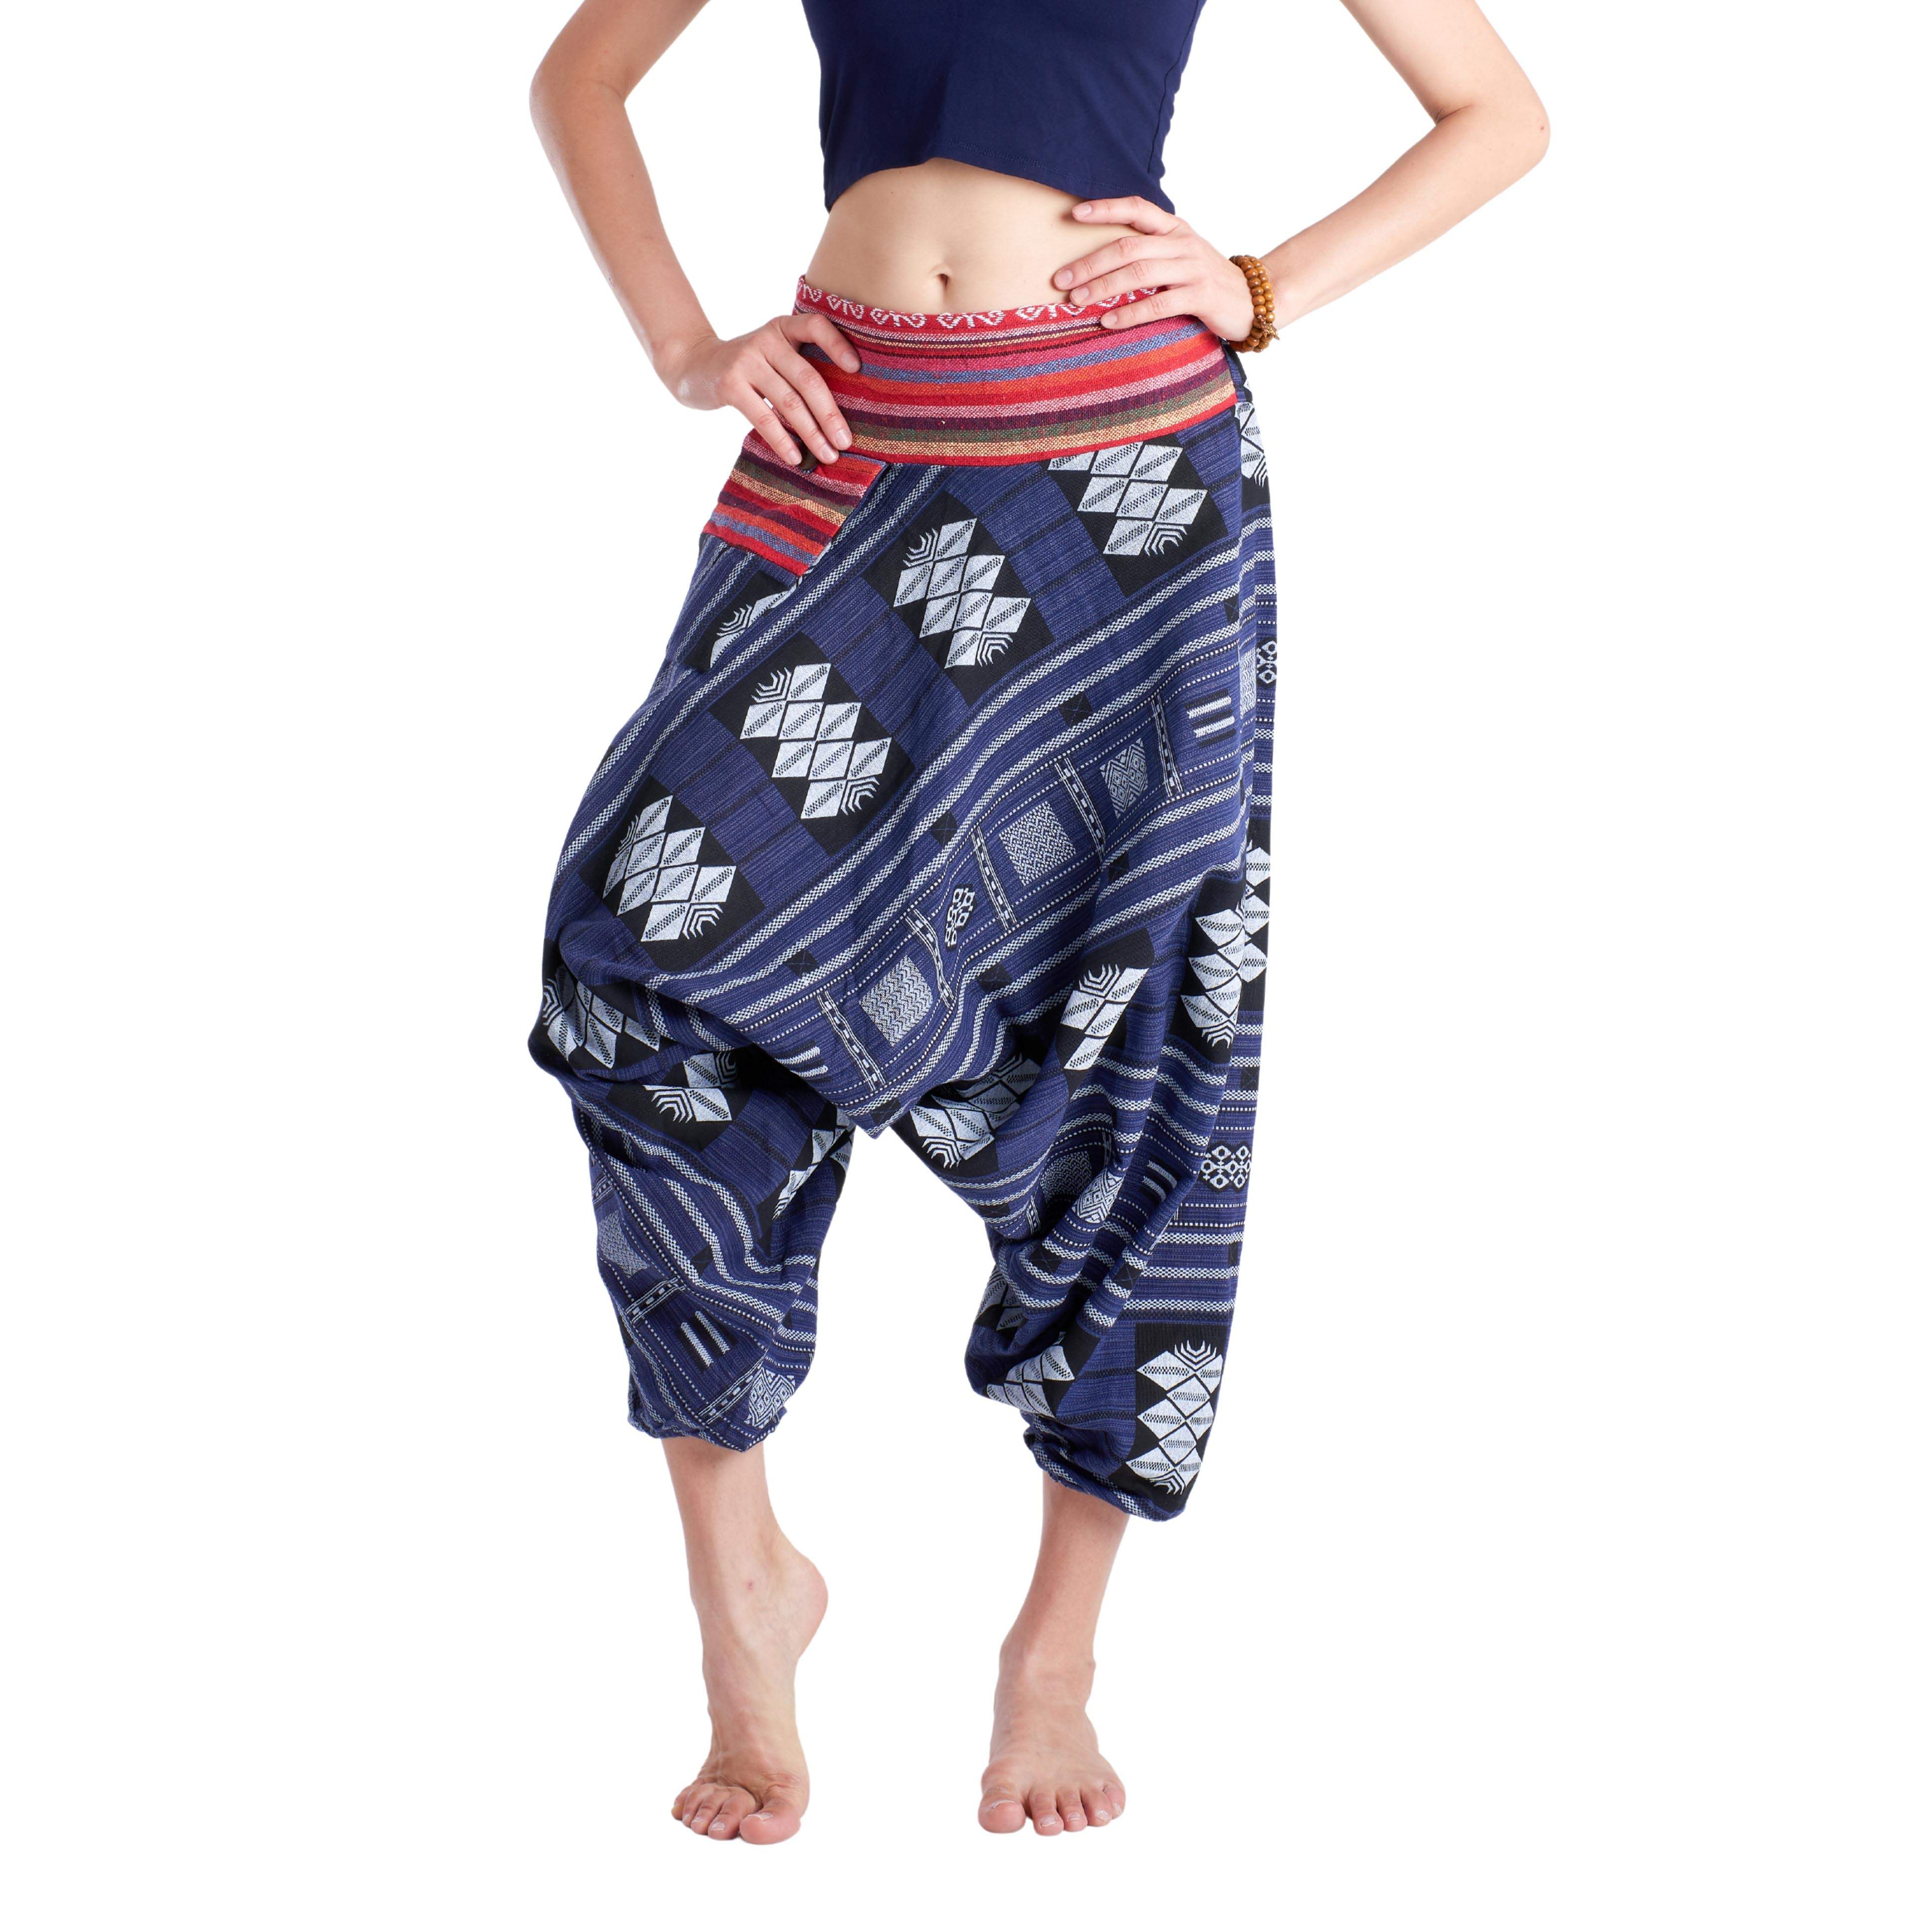 THAI TRIBAL PANTS - BLUE Elepanta Hippie Pants | Tribal - Buy Today Elephant Pants Jewelry And Bohemian Clothes Handmade In Thailand Help To Save The Elephants FairTrade And Vegan